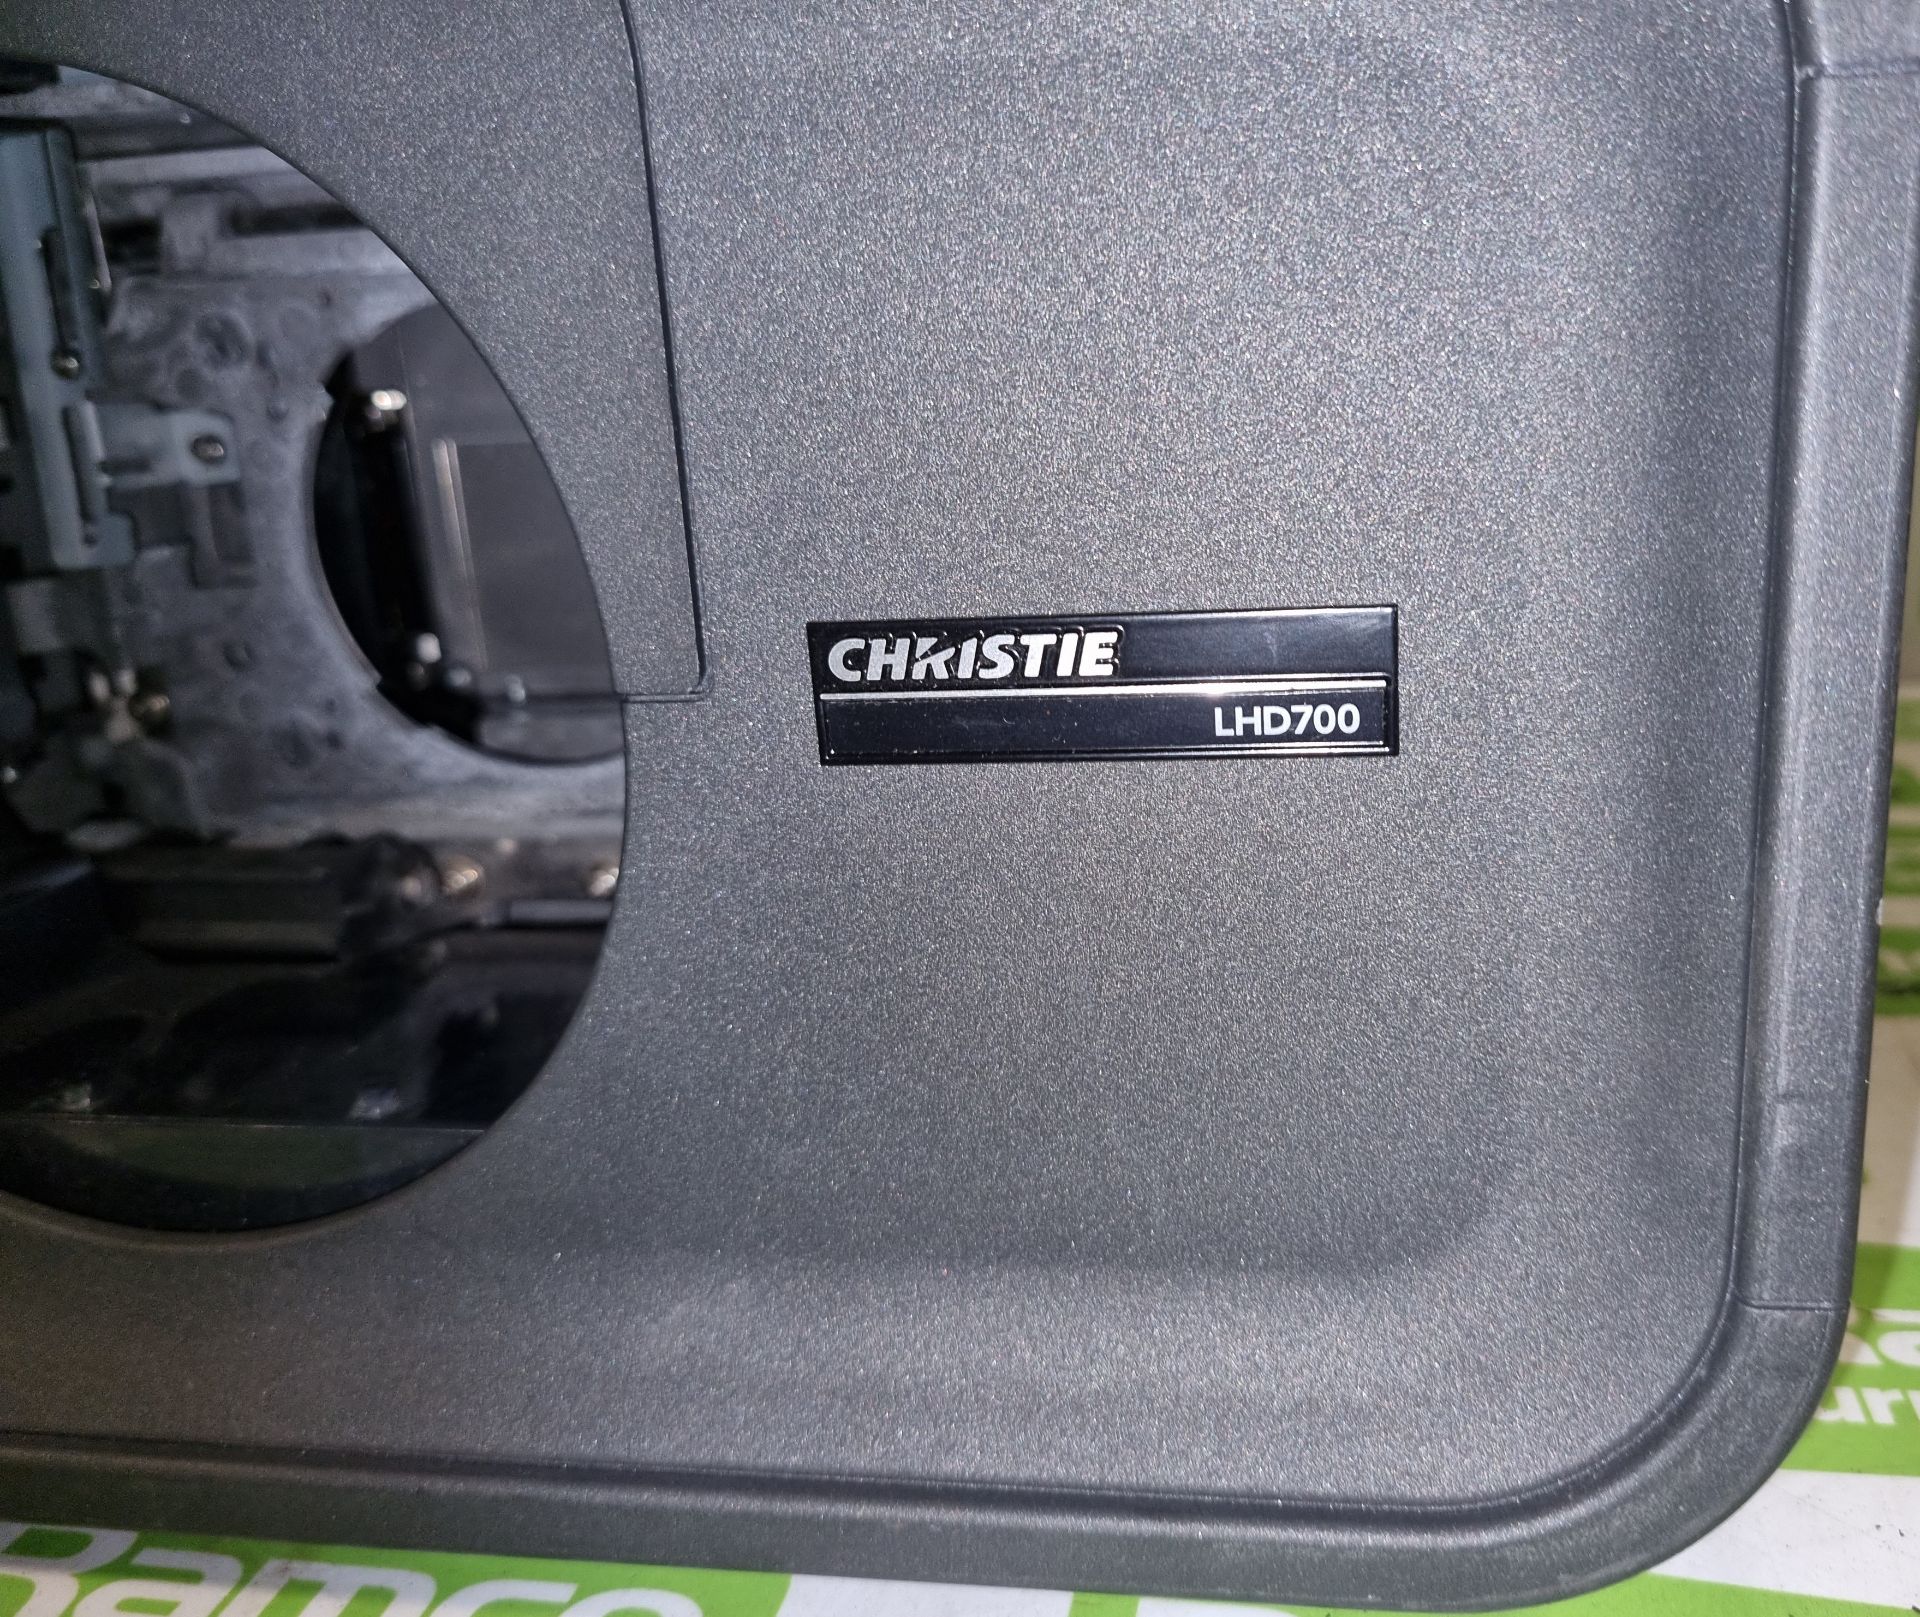 Christie LHD700 digital projector (missing lens) - Image 3 of 7